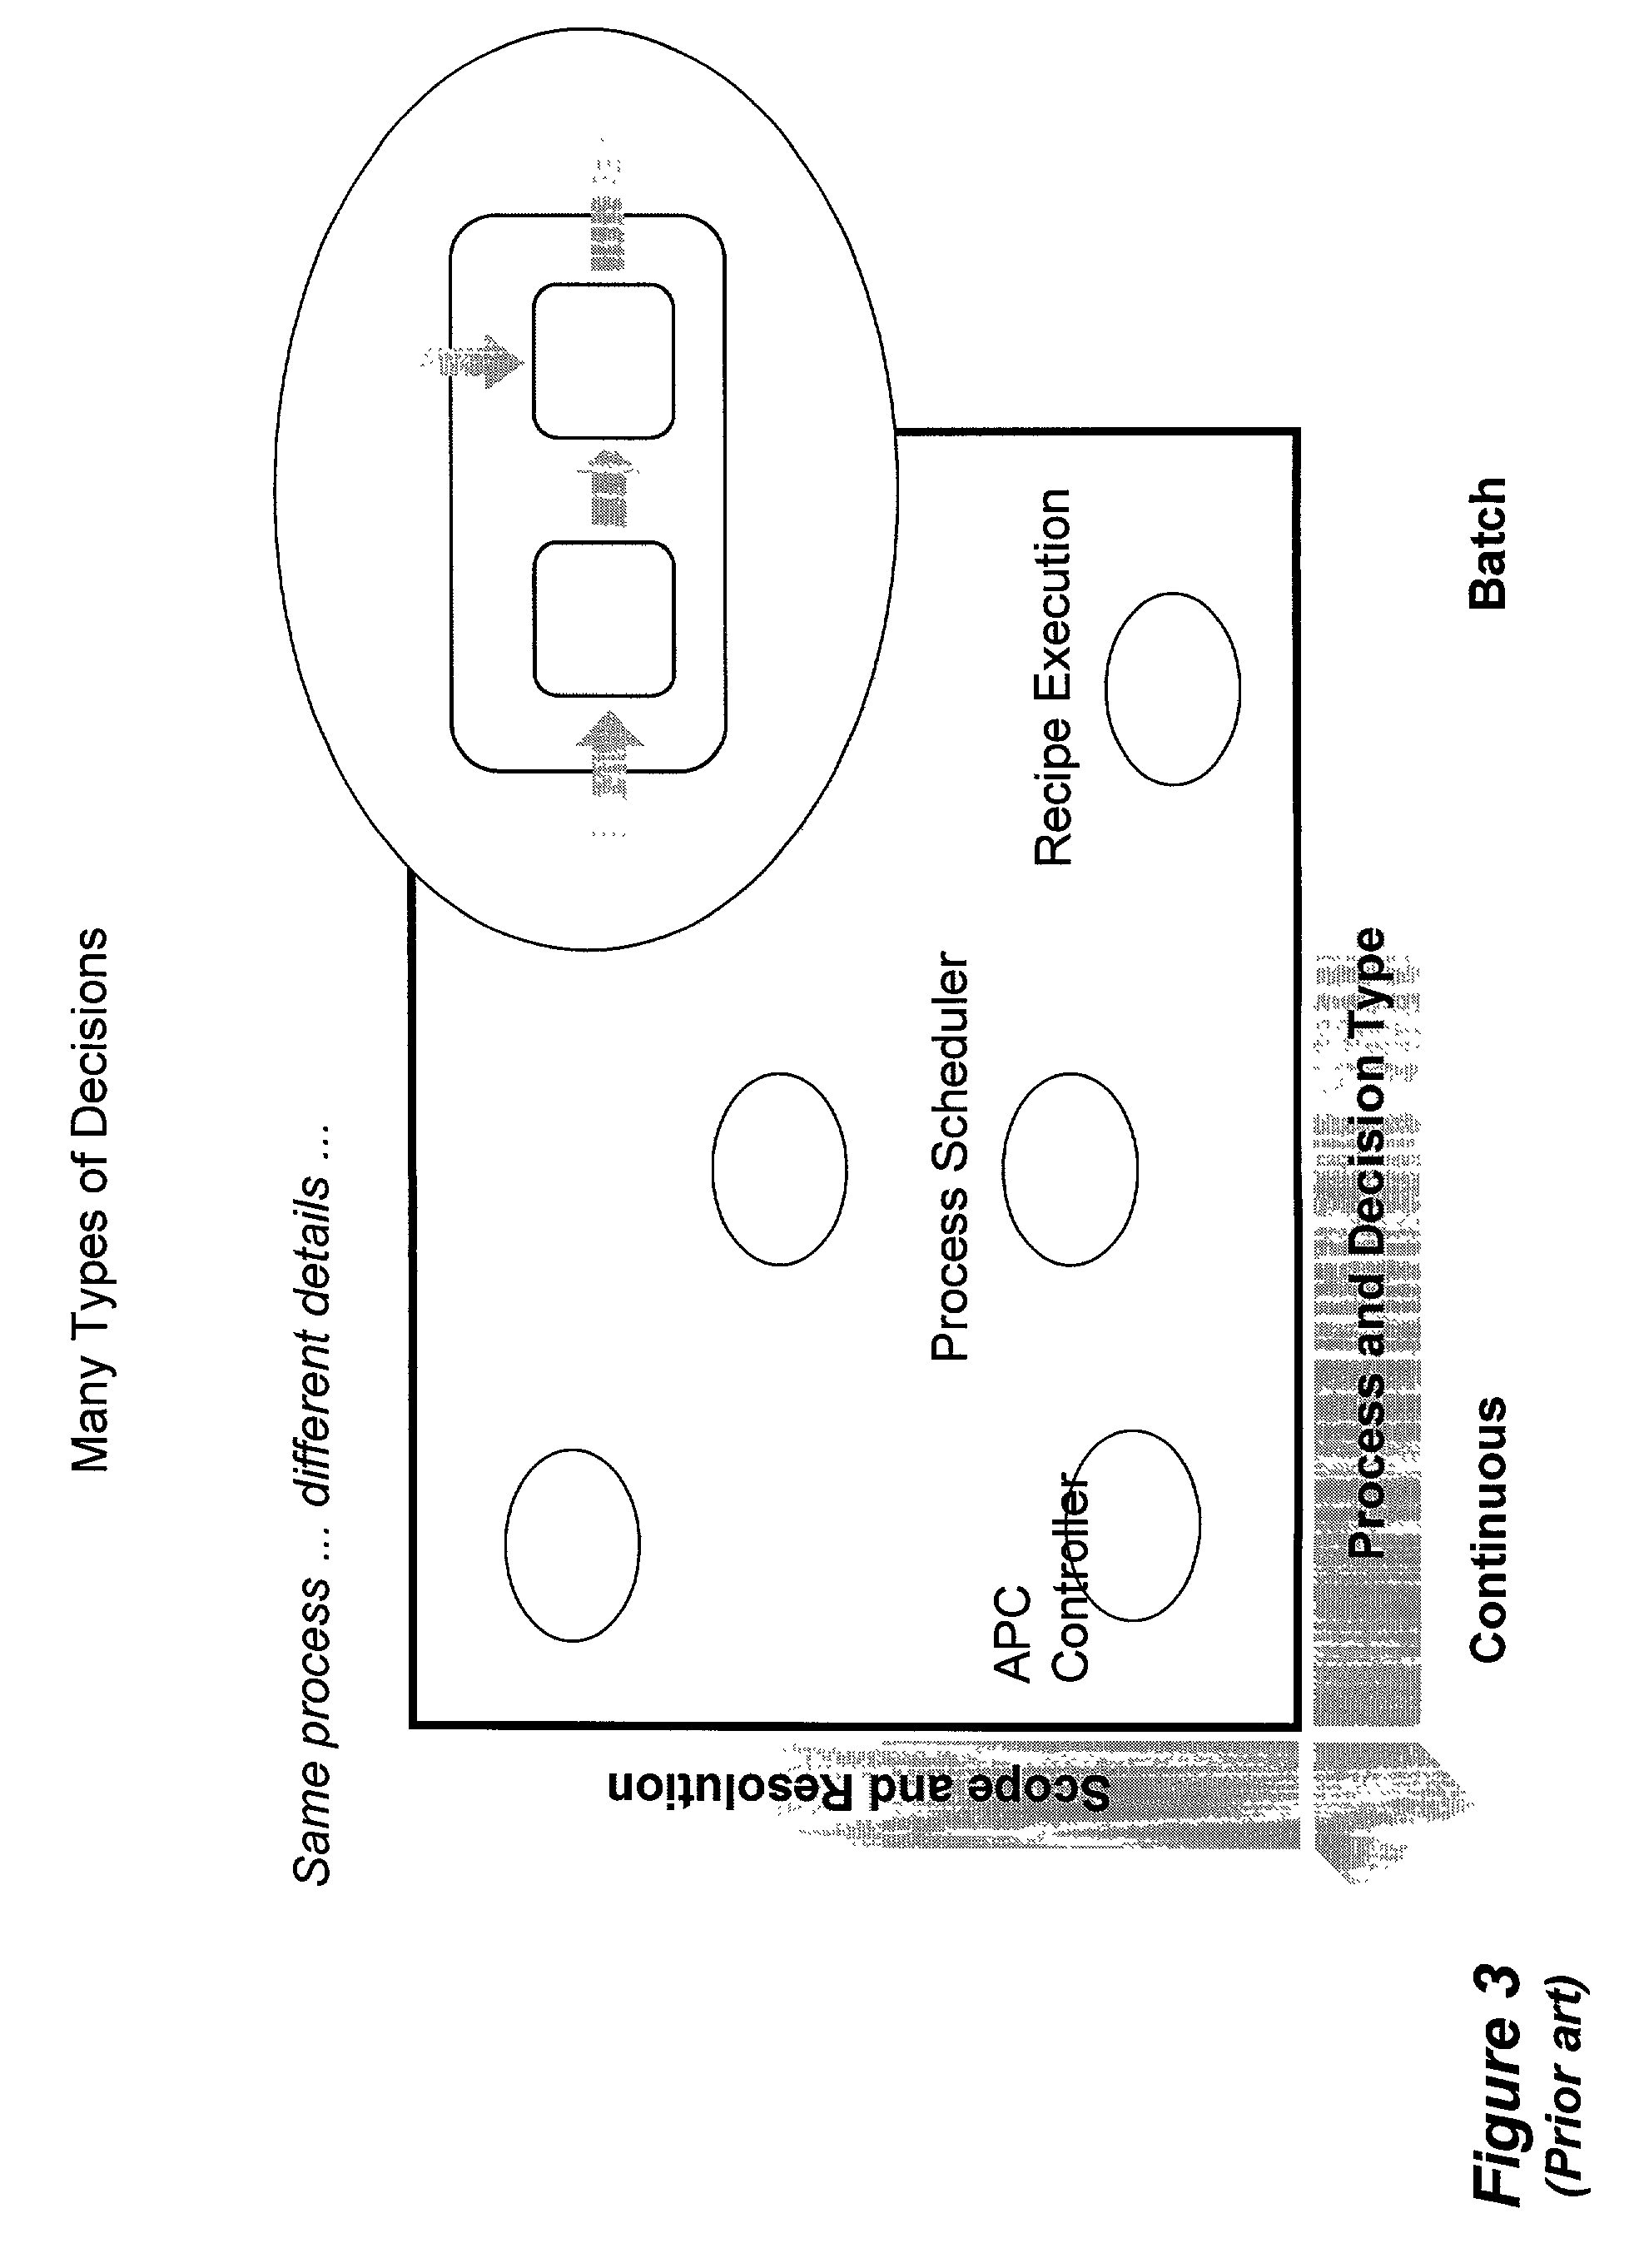 System and method for enterprise modeling, optimization and control